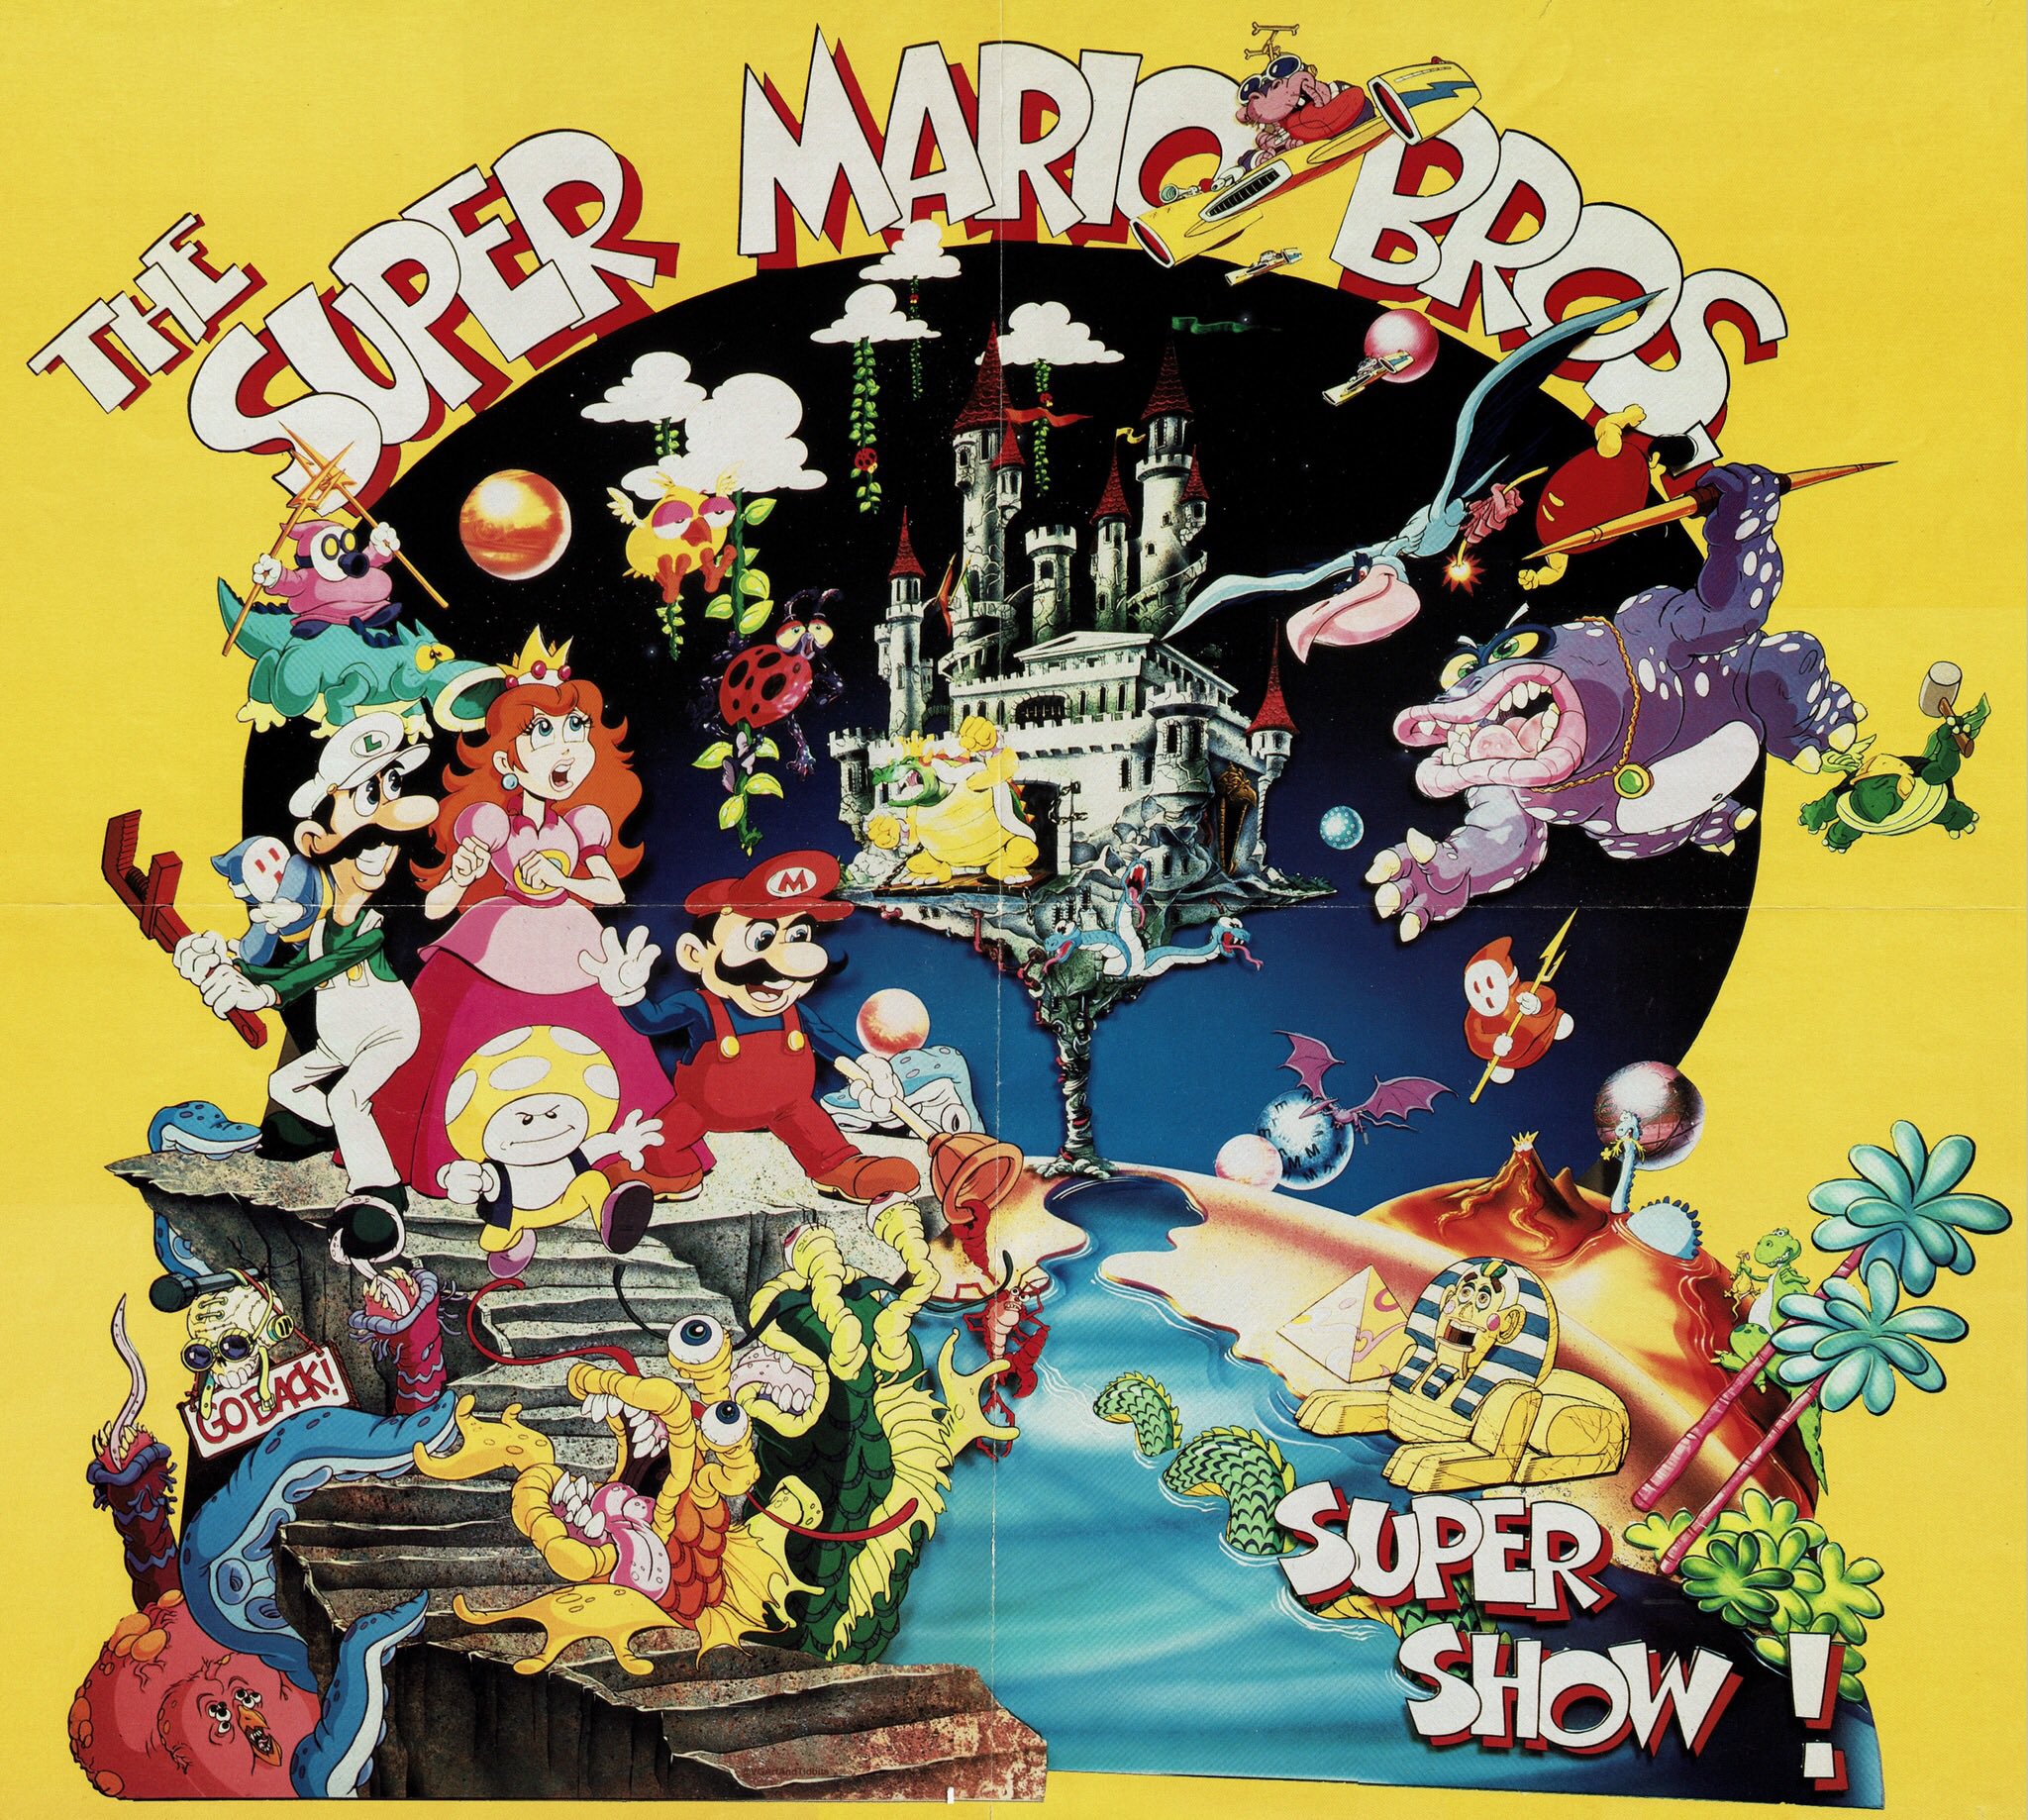 A poster depicts Mario, Luigi, and Toad, the former two armed with a plunger and a wrench, respectively, guarding Princess Toadstool. They stand to the left side of the poster from the viewer's perspective, and defend the princess from various monsters trying to climb up or attacking from above. Some of the monsters appear to be recognizable enemies from Super Mario Bros. 2, like a Snifit. Others appear to be original designs. On the right side of the poster from the same perspective, there are more flying monsters, and below them is a desert area with a Sphinx-like monster. In the background of the scene, a castle rises on a thin stalk, and an off-model Bowser stands outside the castle entrance. At the top of the scene, the words "The Super Mario Bros." stretch across the poster, while the words "Super Show!" appear in the bottom right, beneath the desert.